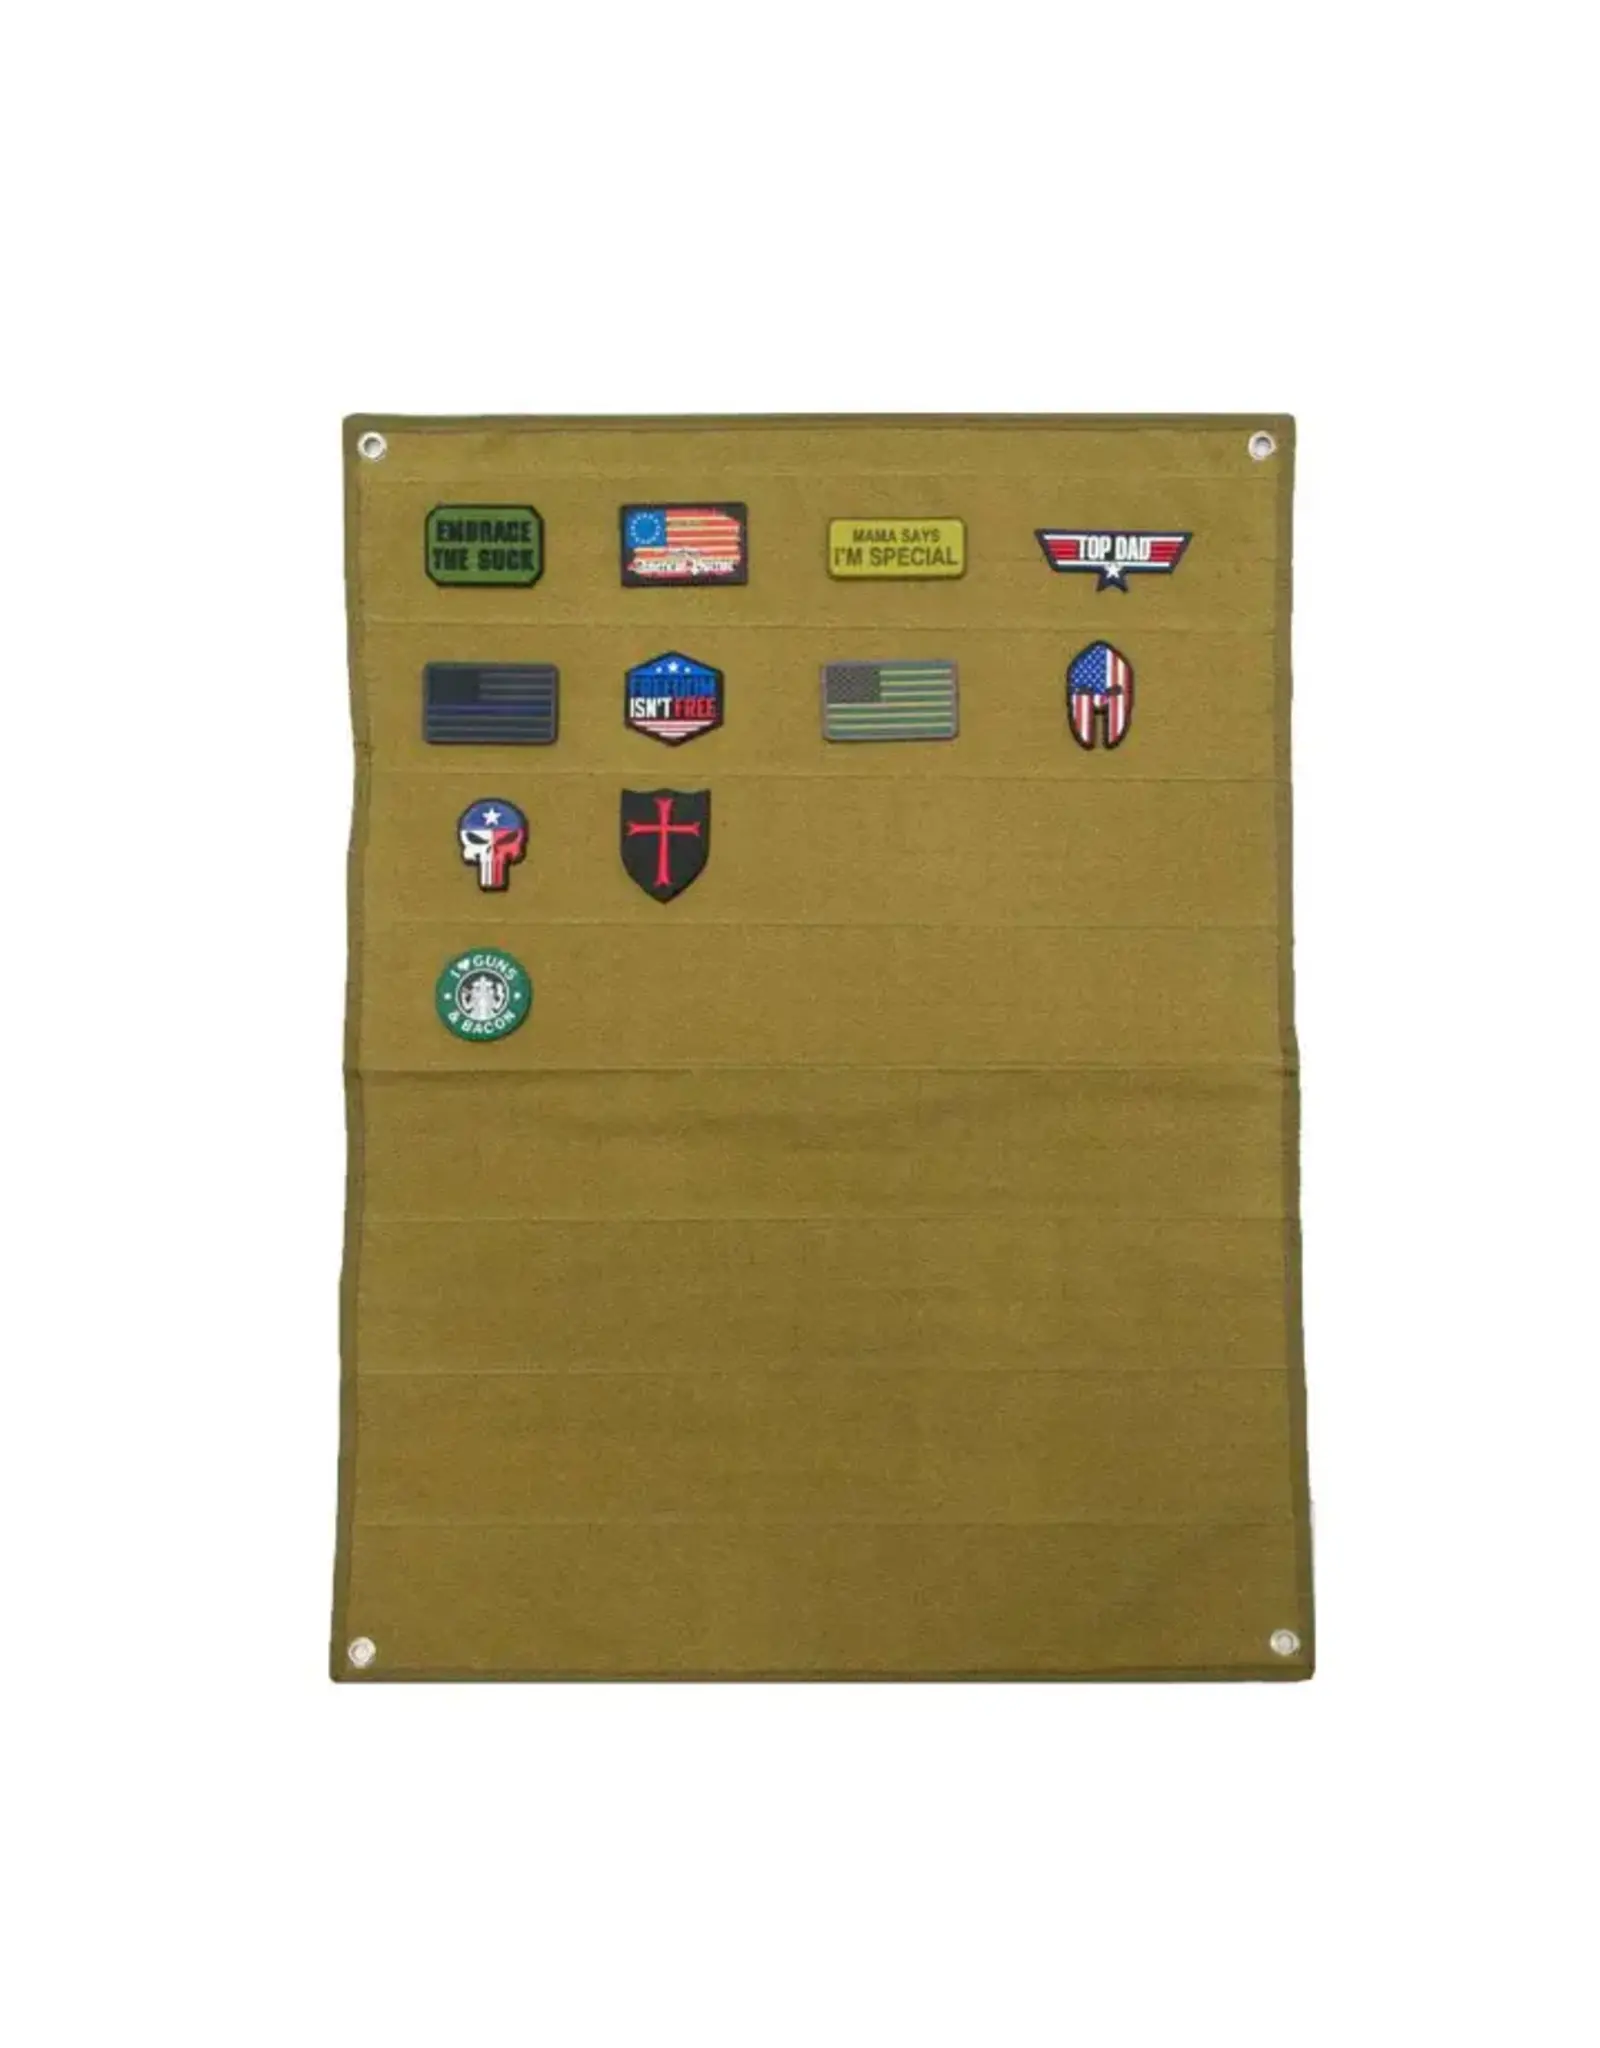 Tactical Morale Patch Wall